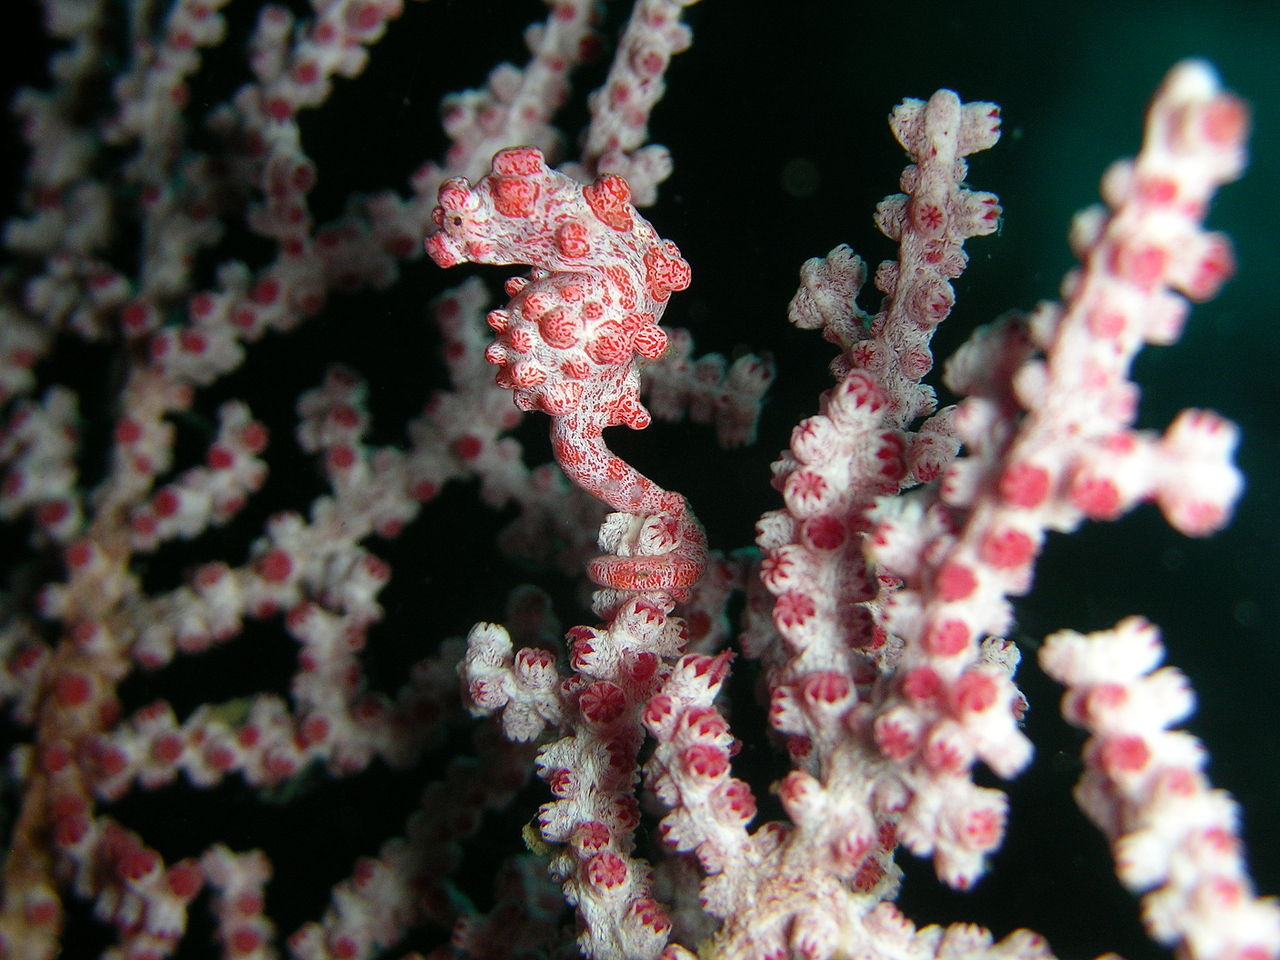 a pygmy seahorse (not the newly found one) from Lembeh Straits. Photo by Steve Childs Wikimedia Commons